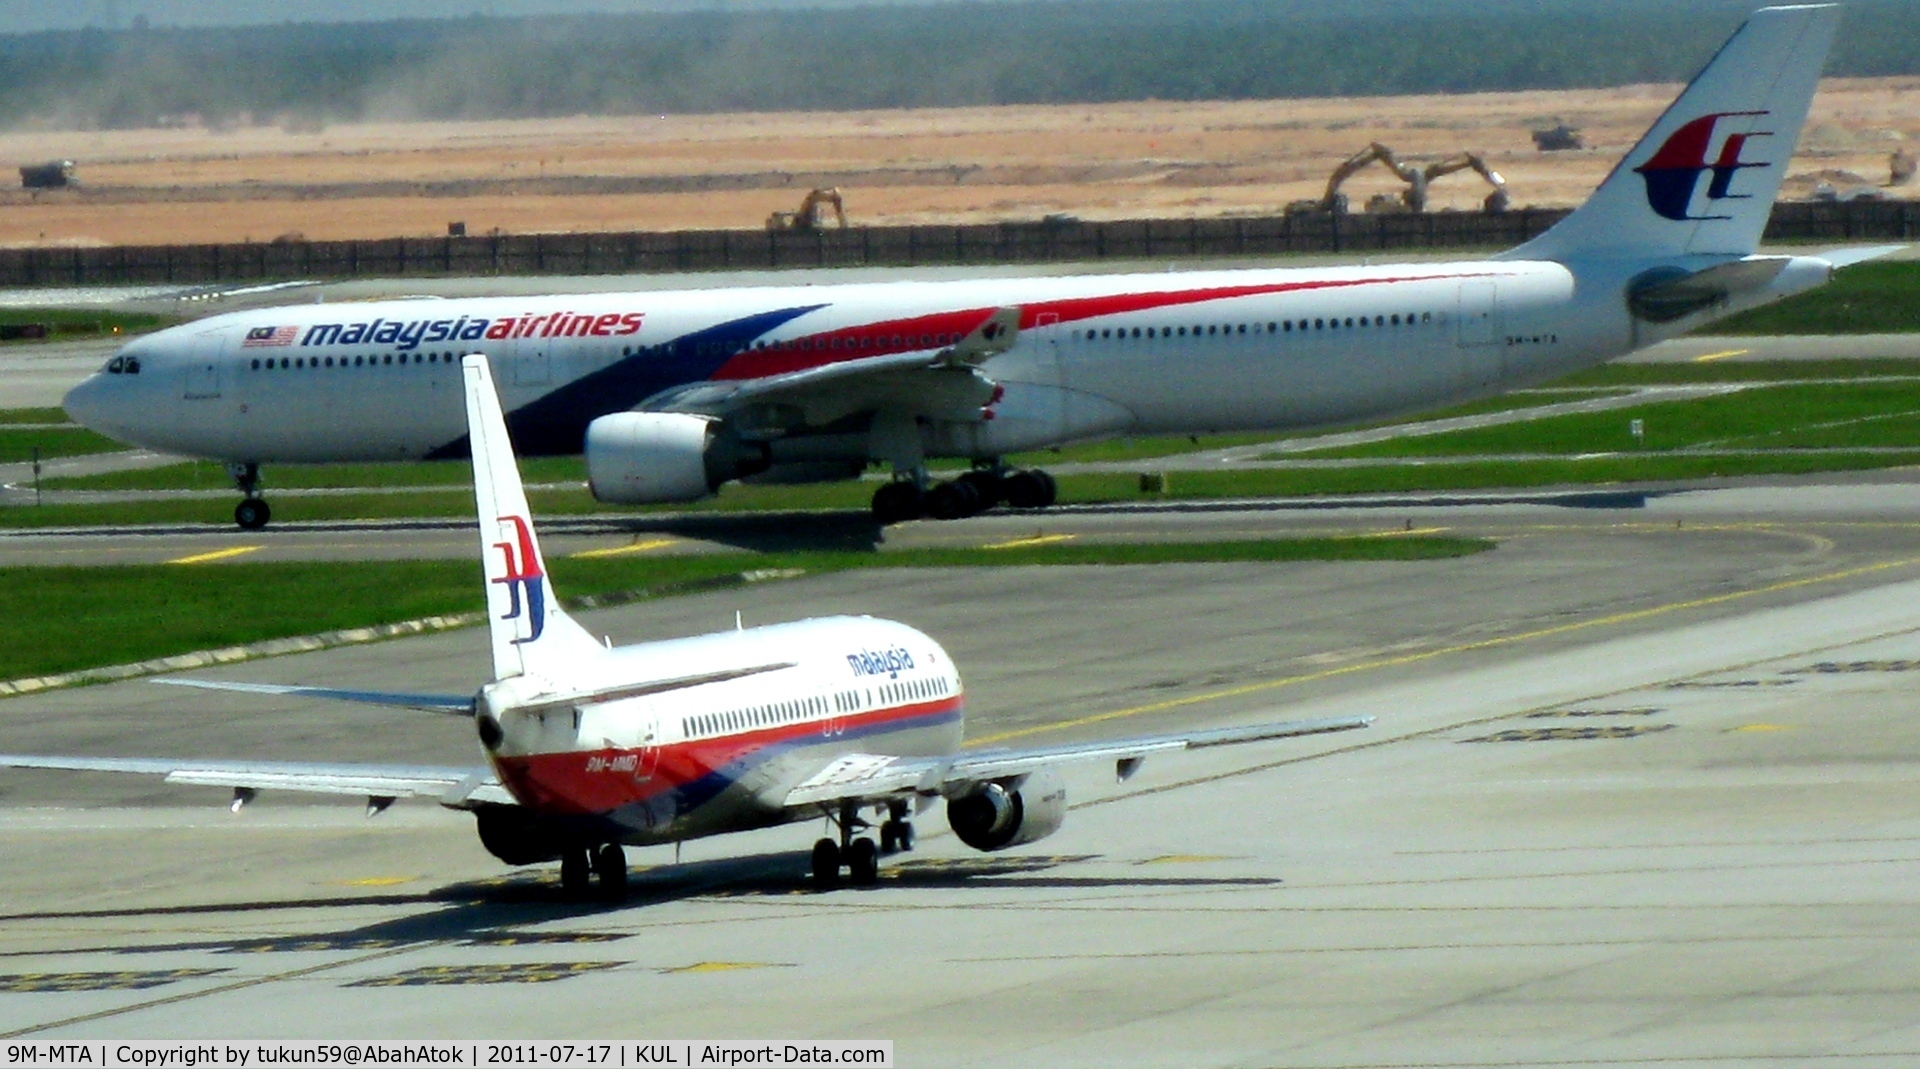 9M-MTA, 2011 Airbus A330-323 C/N 1209, Malaysia Airlines